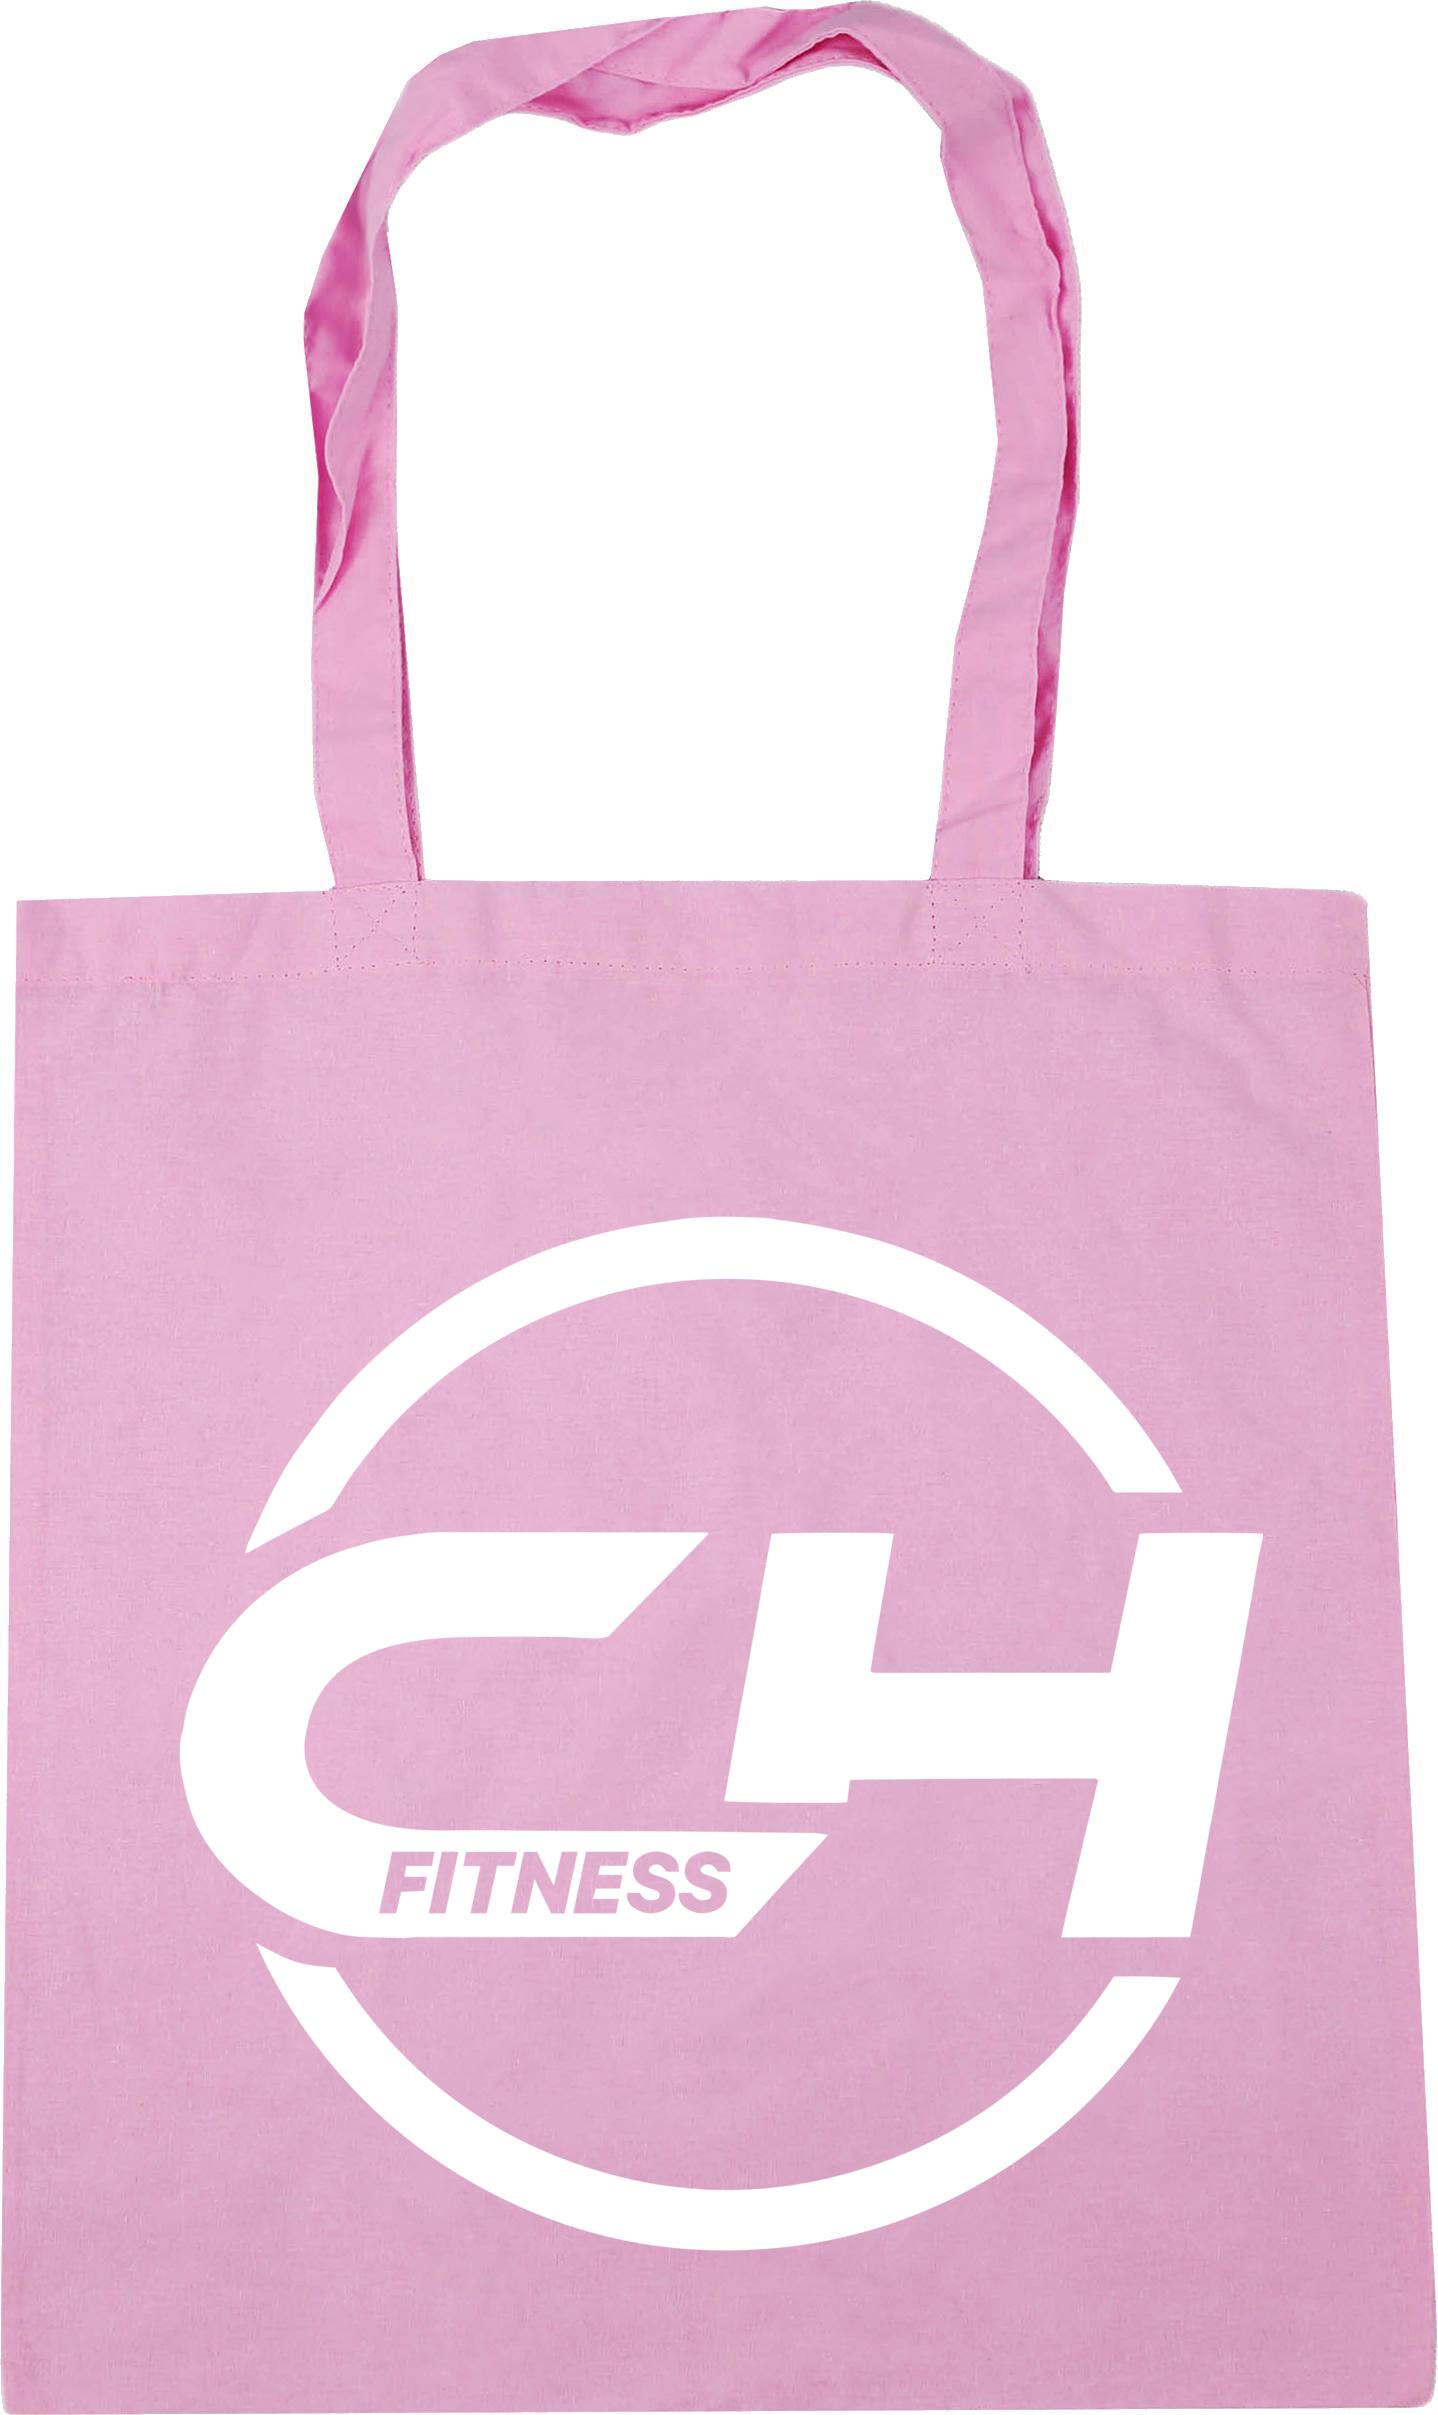 CH Fitness Tote Bag